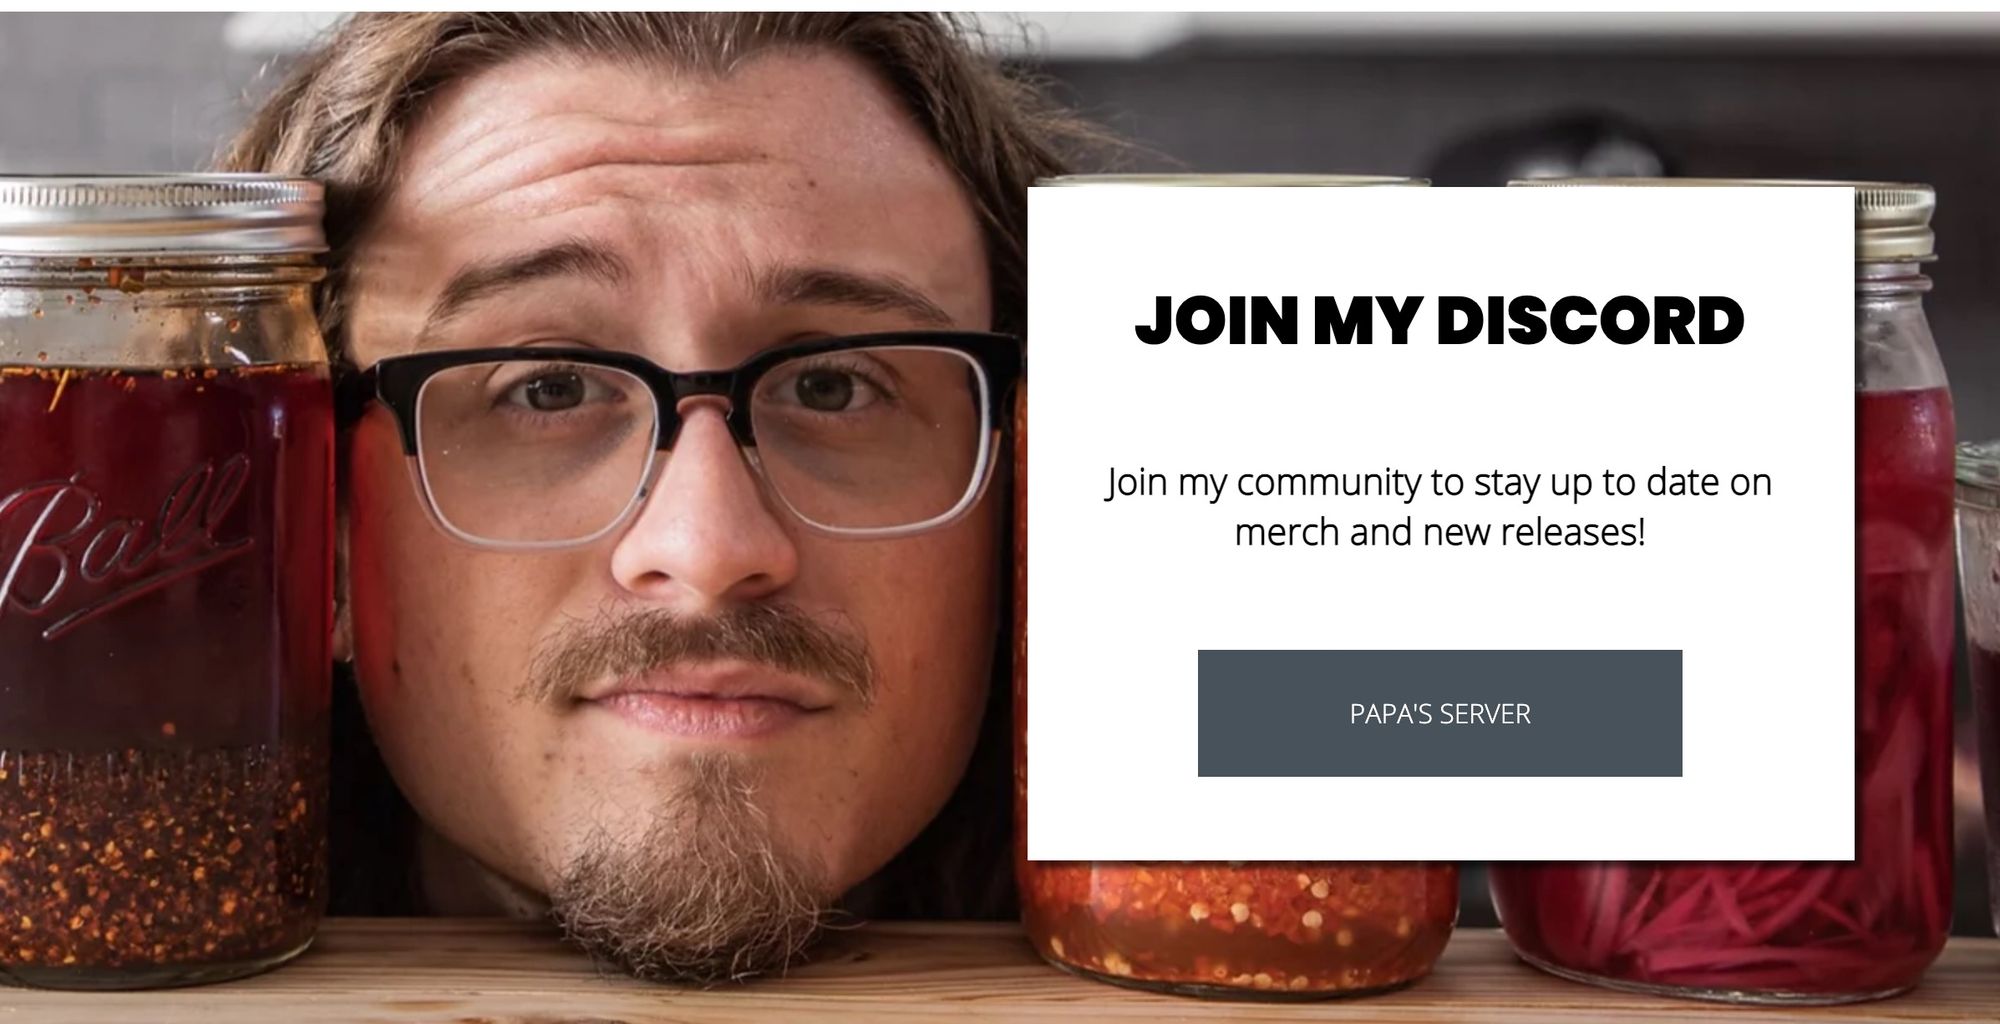 A New Chef Economy Emerges On Discord, Livestreaming, & E-Commerce